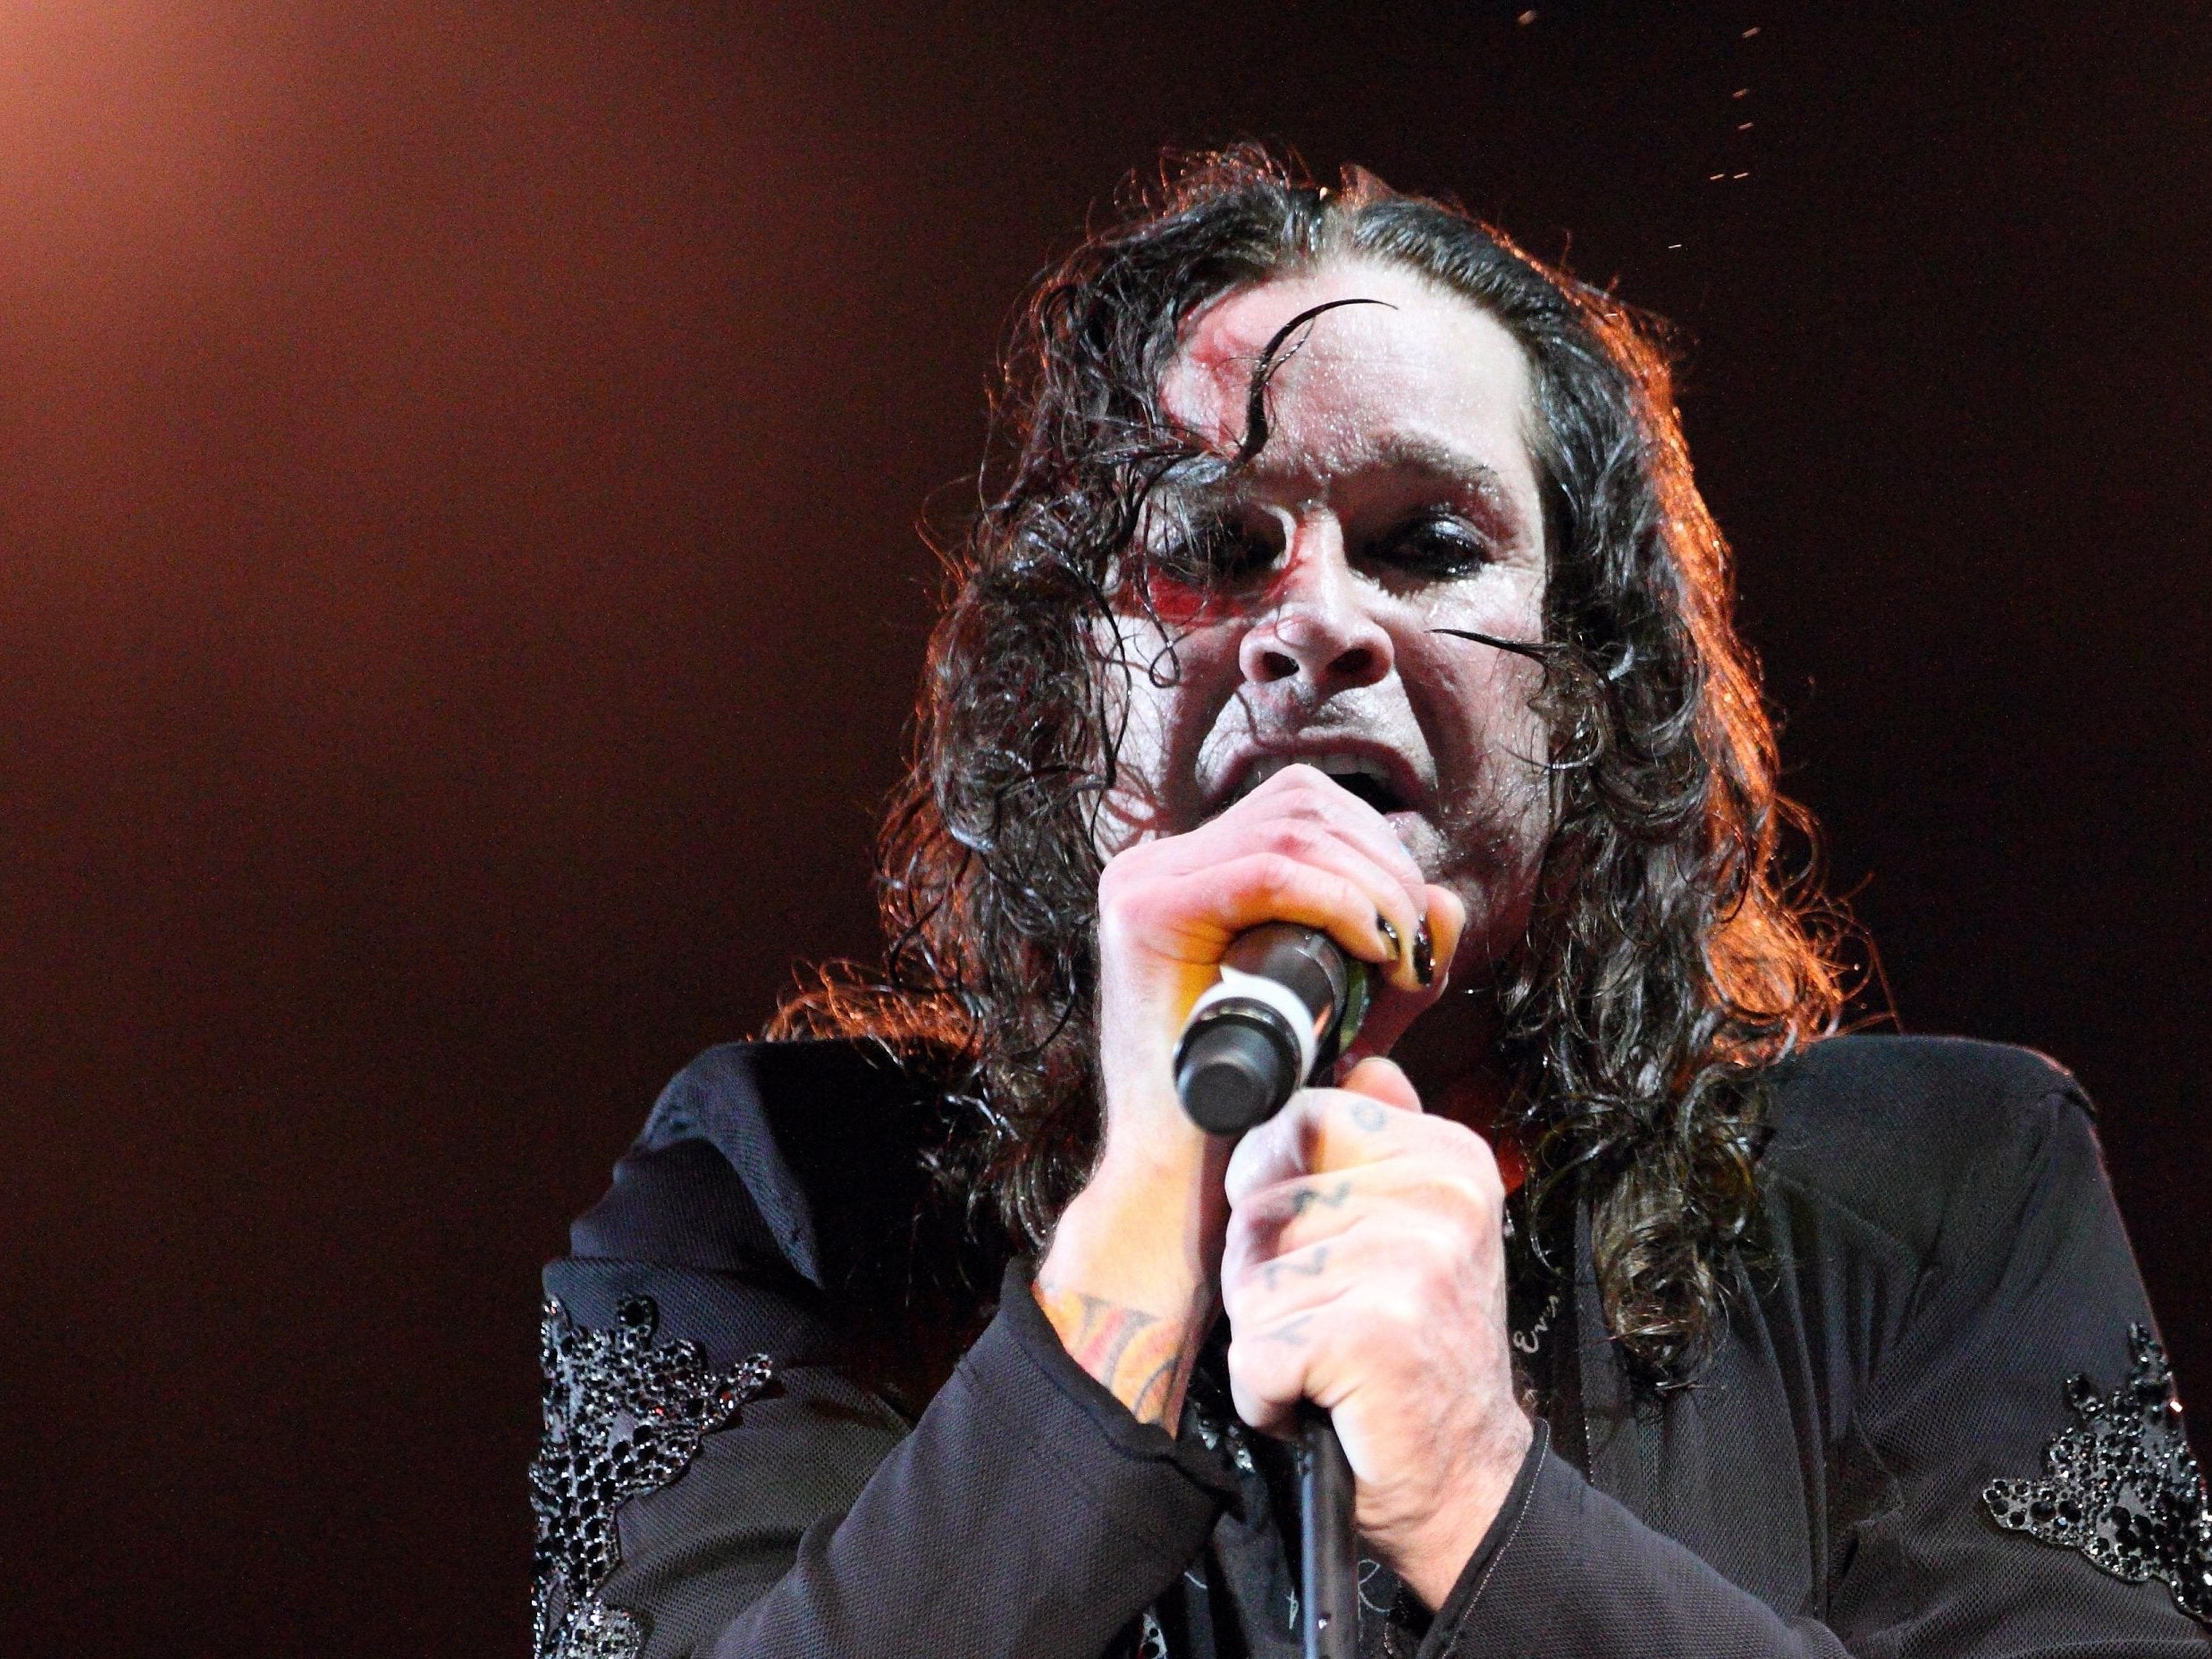 Ozzy Osbourne announces rescheduled tour dates for 2020: ‘I can’t wait to get ...